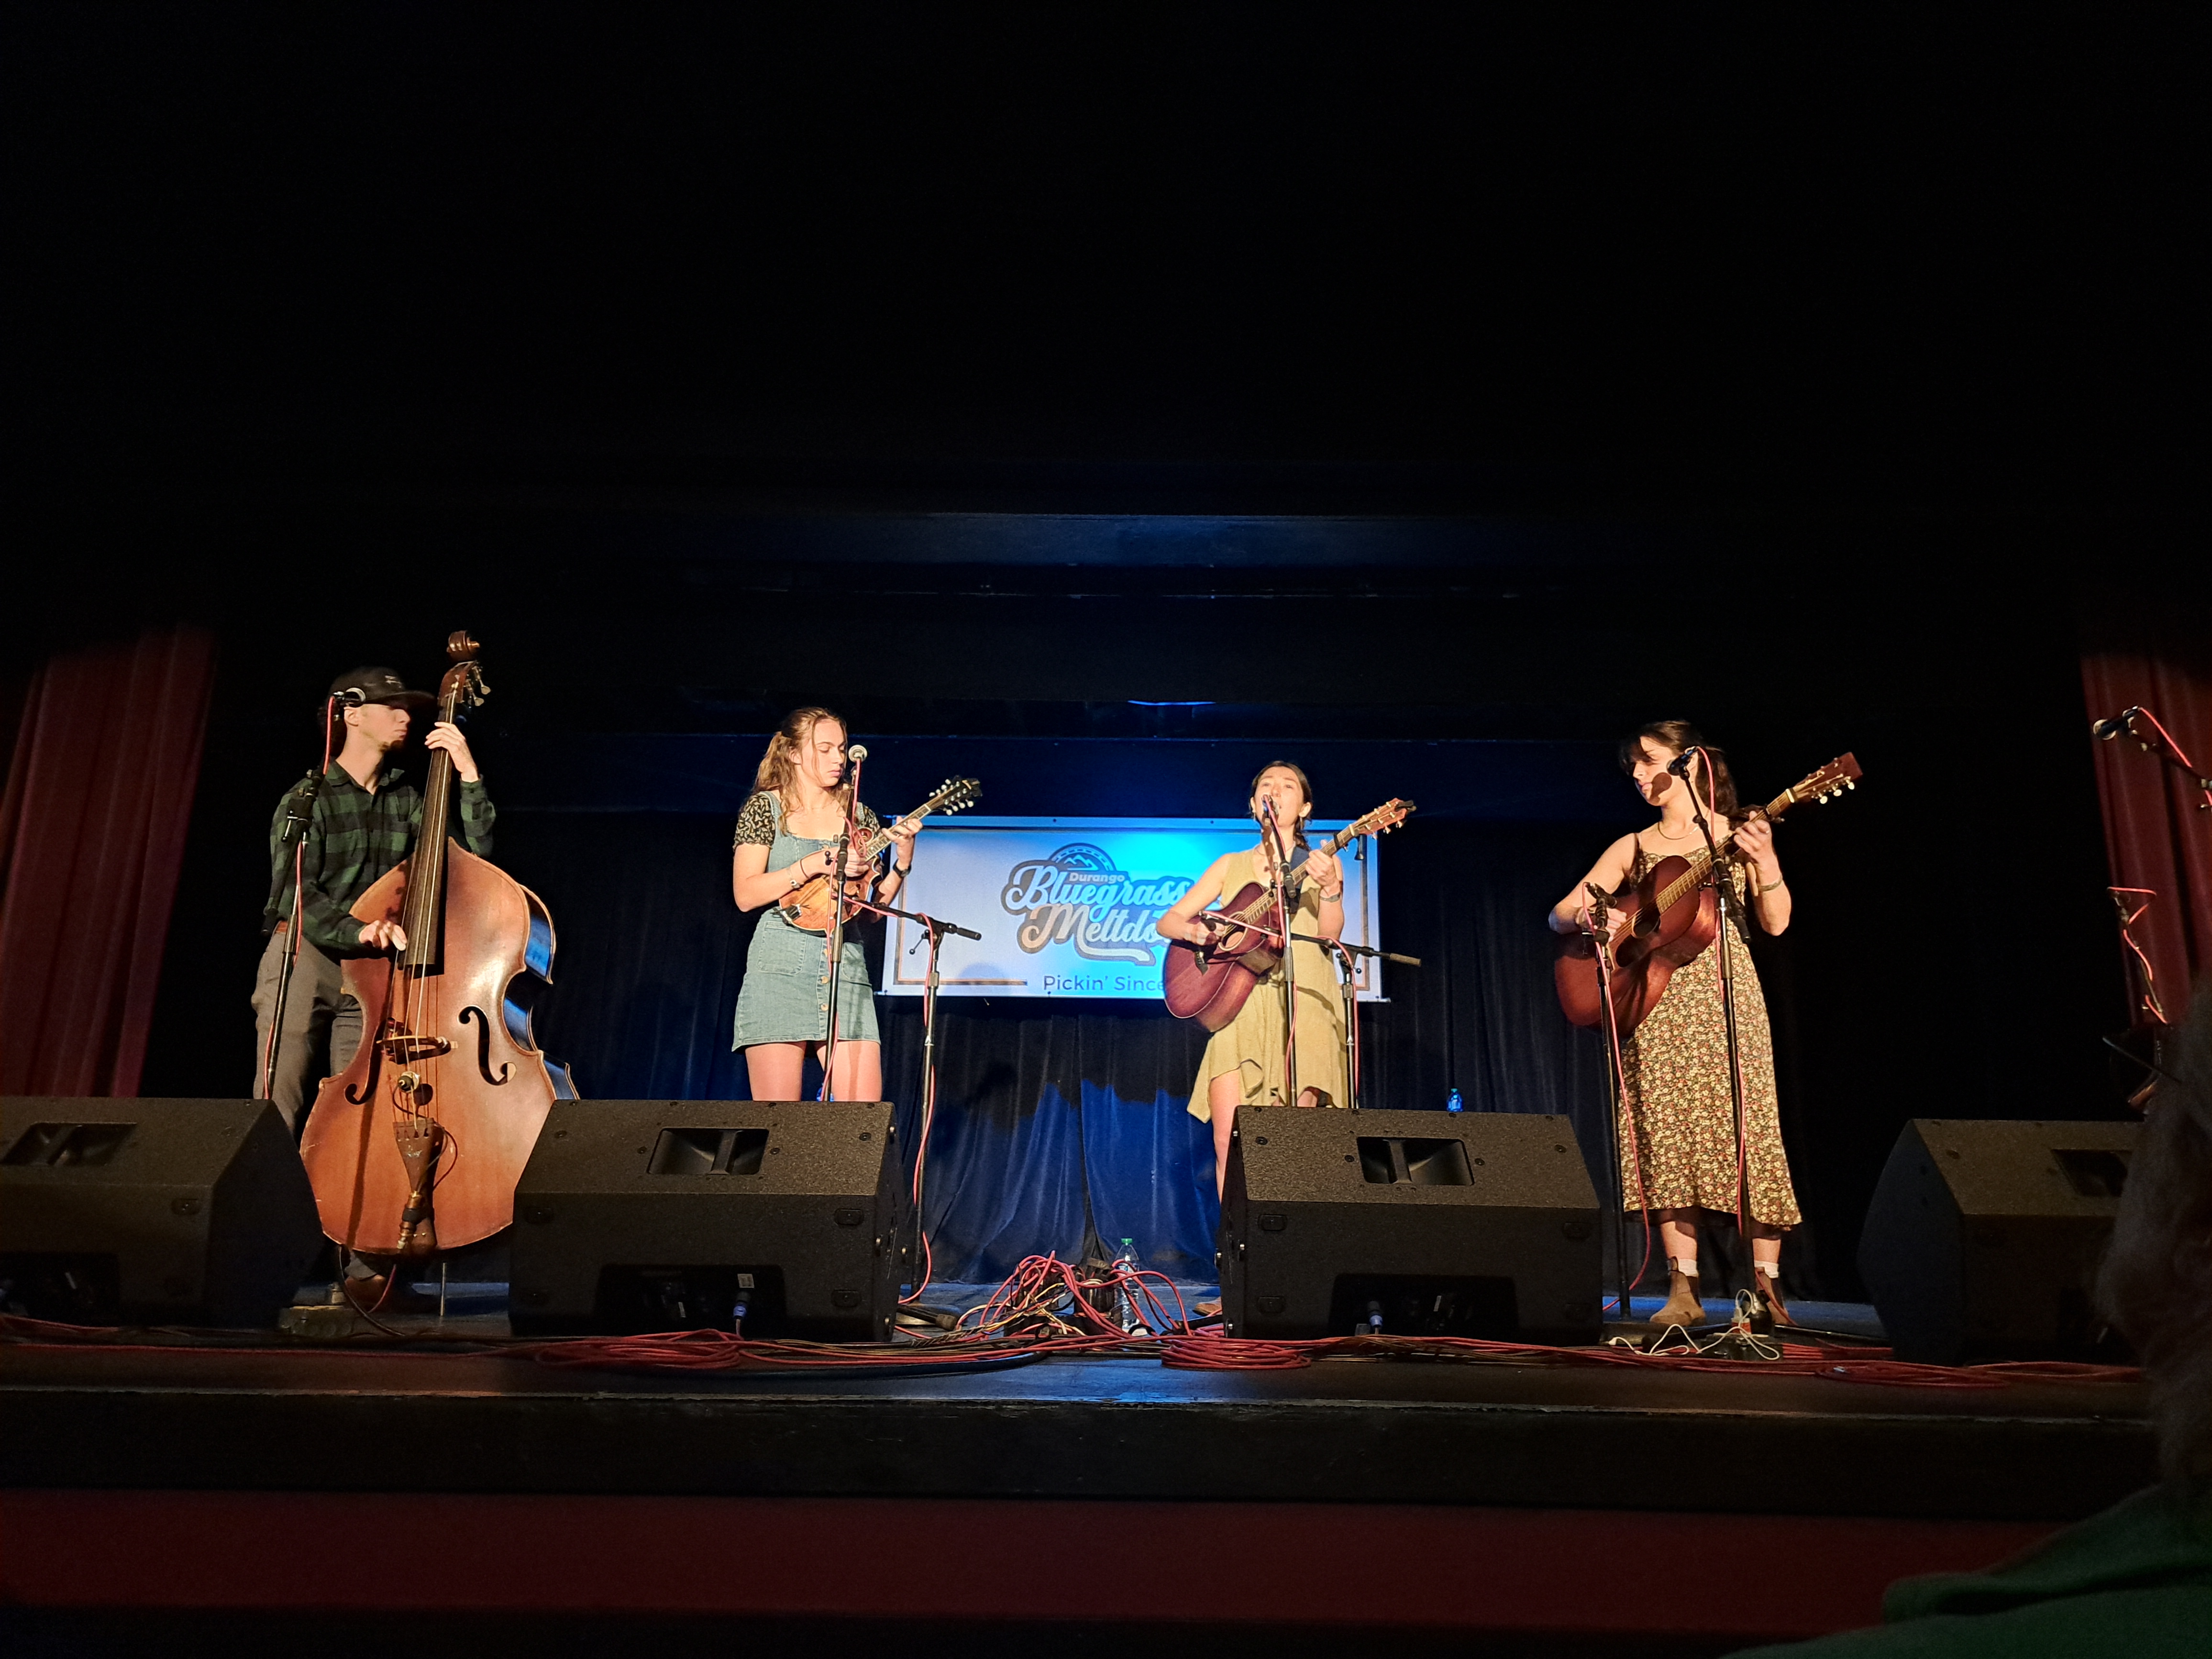 The CC Rocky Mountain Tops perform on the main stage of the 2023 Durango Bluegrass Meltdown.